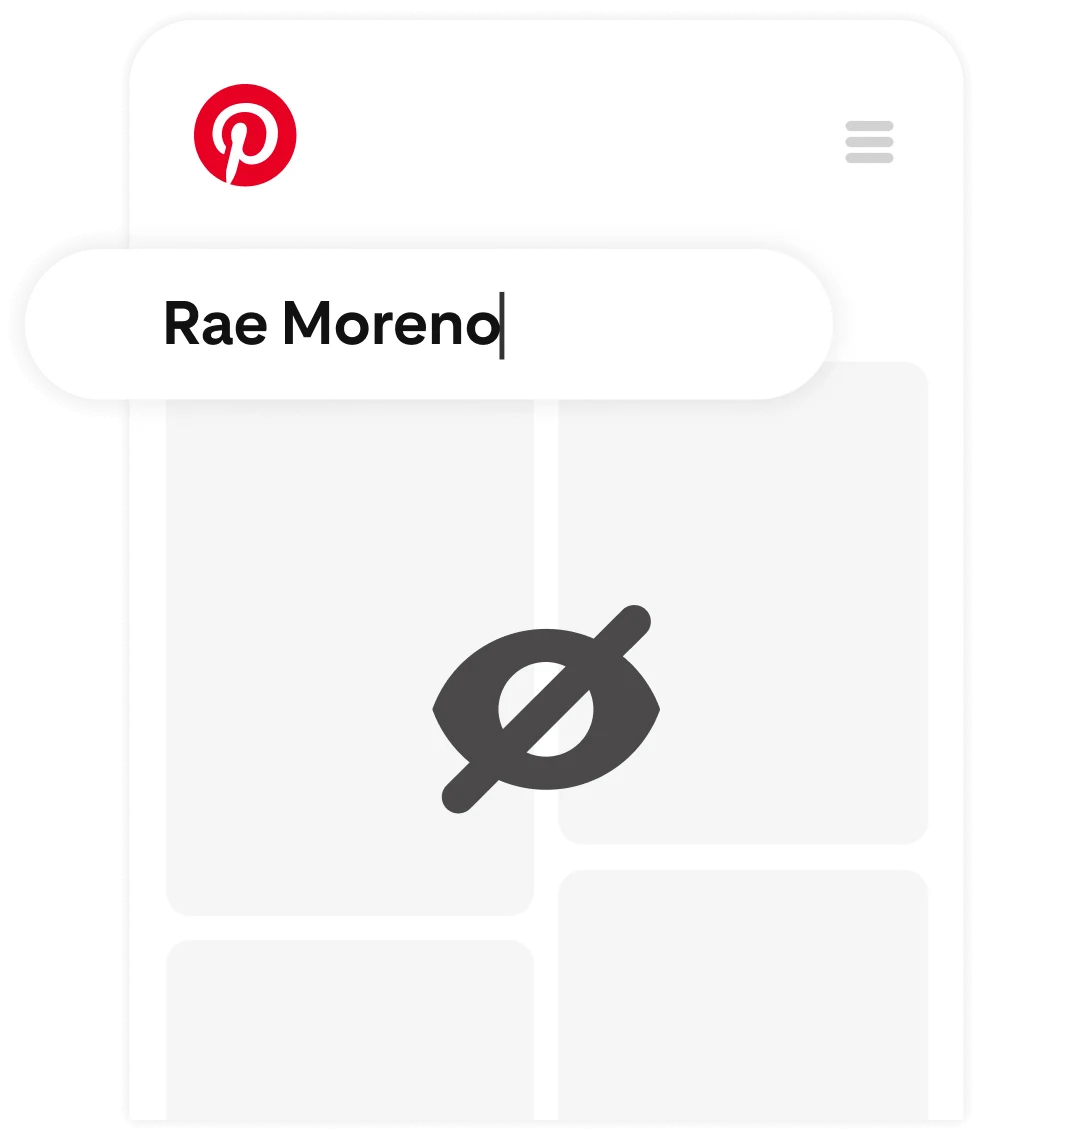 A private Pinterest feed with the name ‘Rae Moreno’ typed in the search bar.